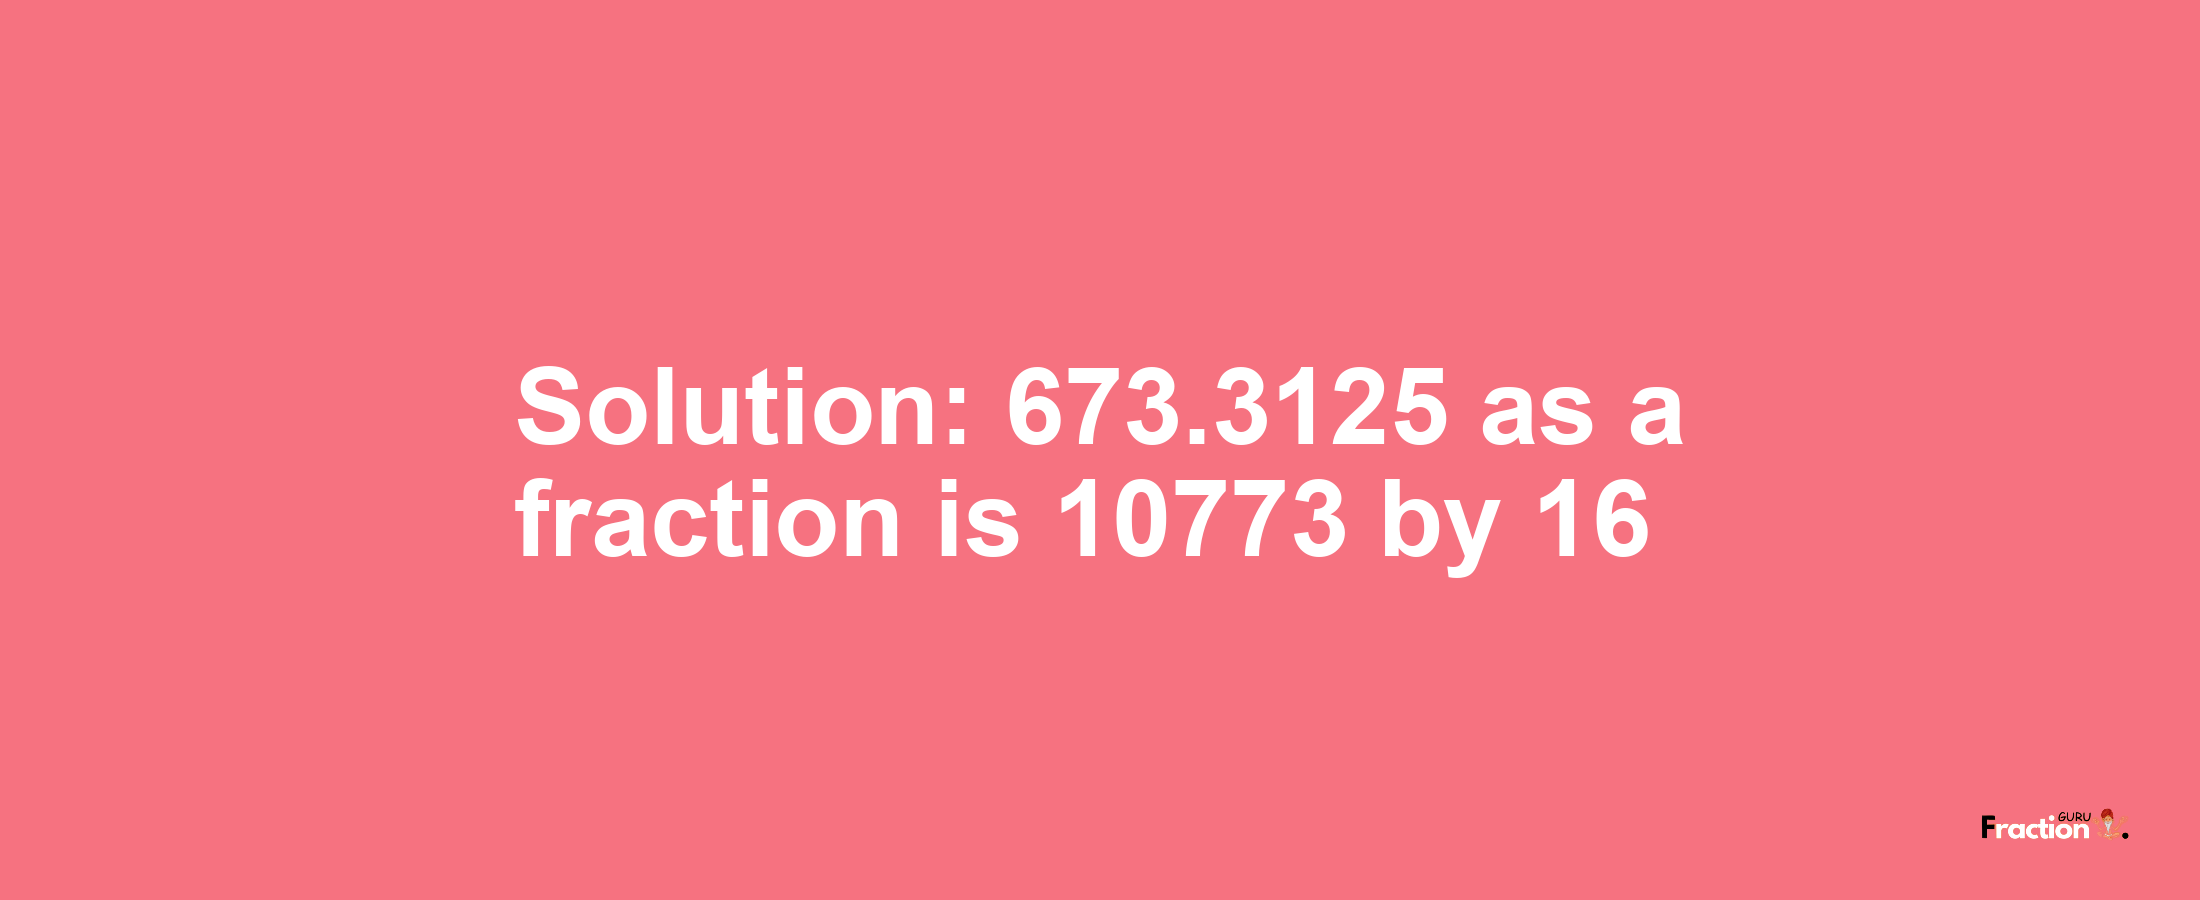 Solution:673.3125 as a fraction is 10773/16